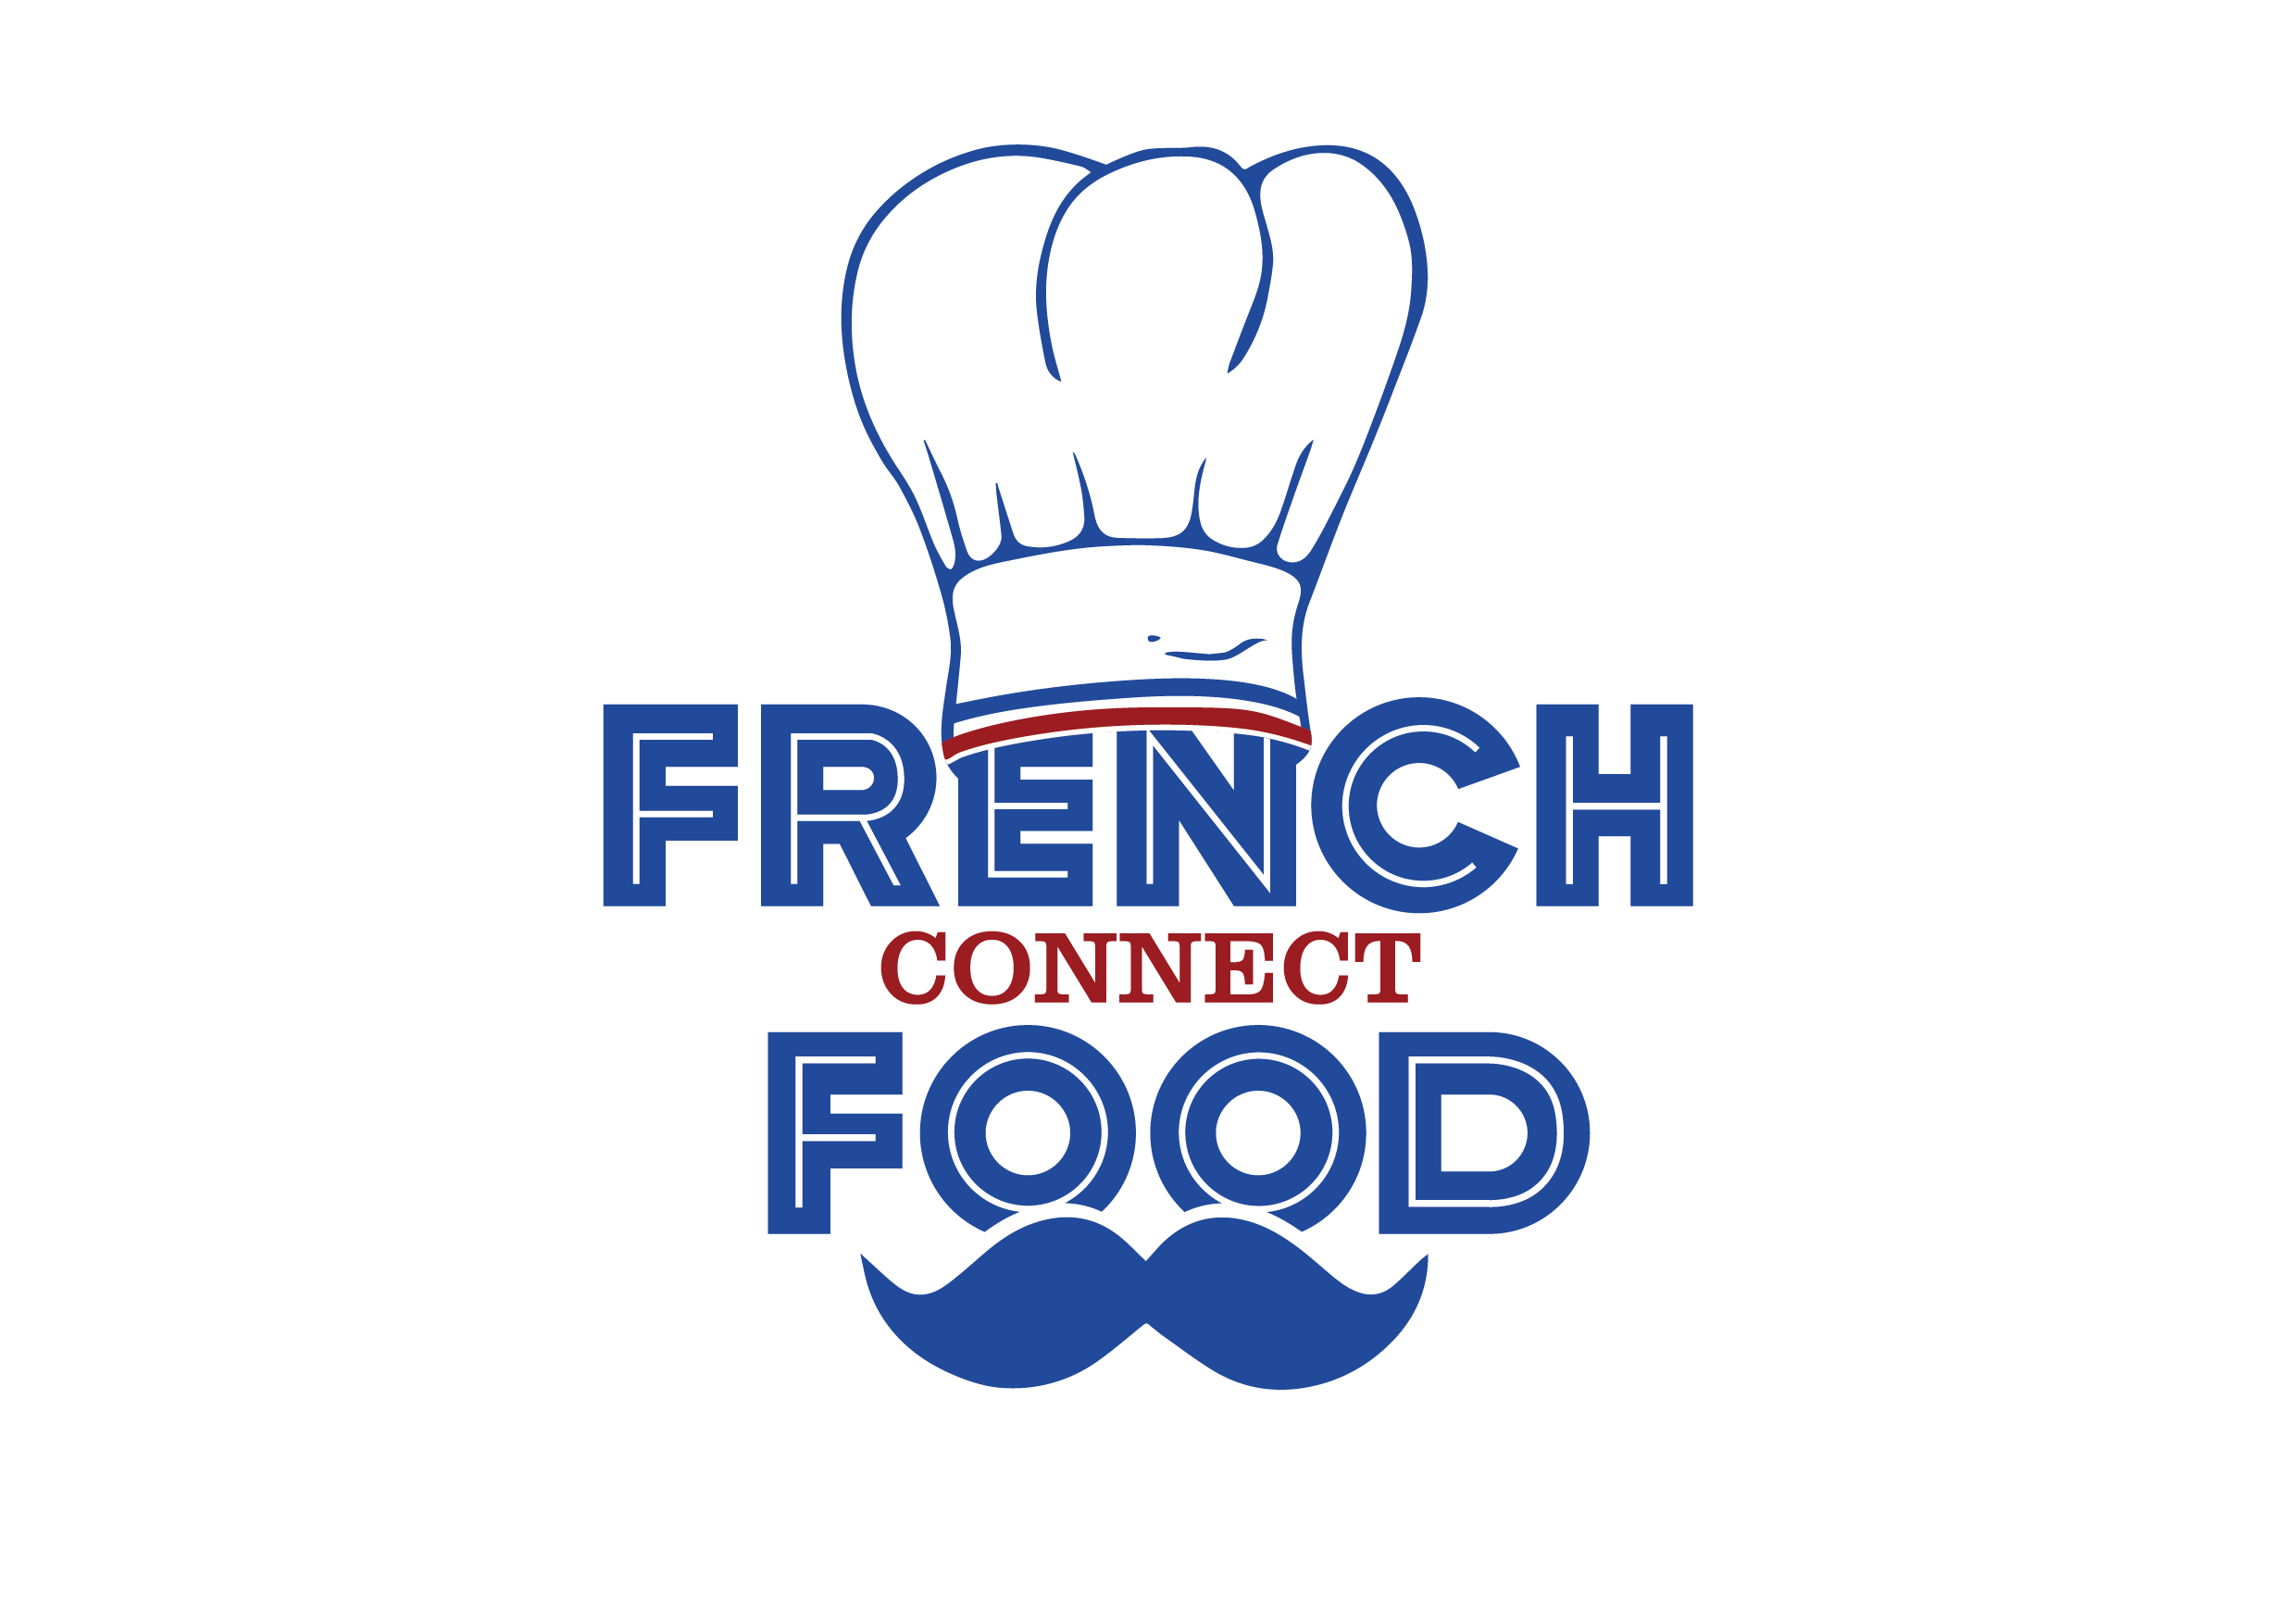 French Food Logo - Catering Coffs harbour. Call us to cater amazing food at your function